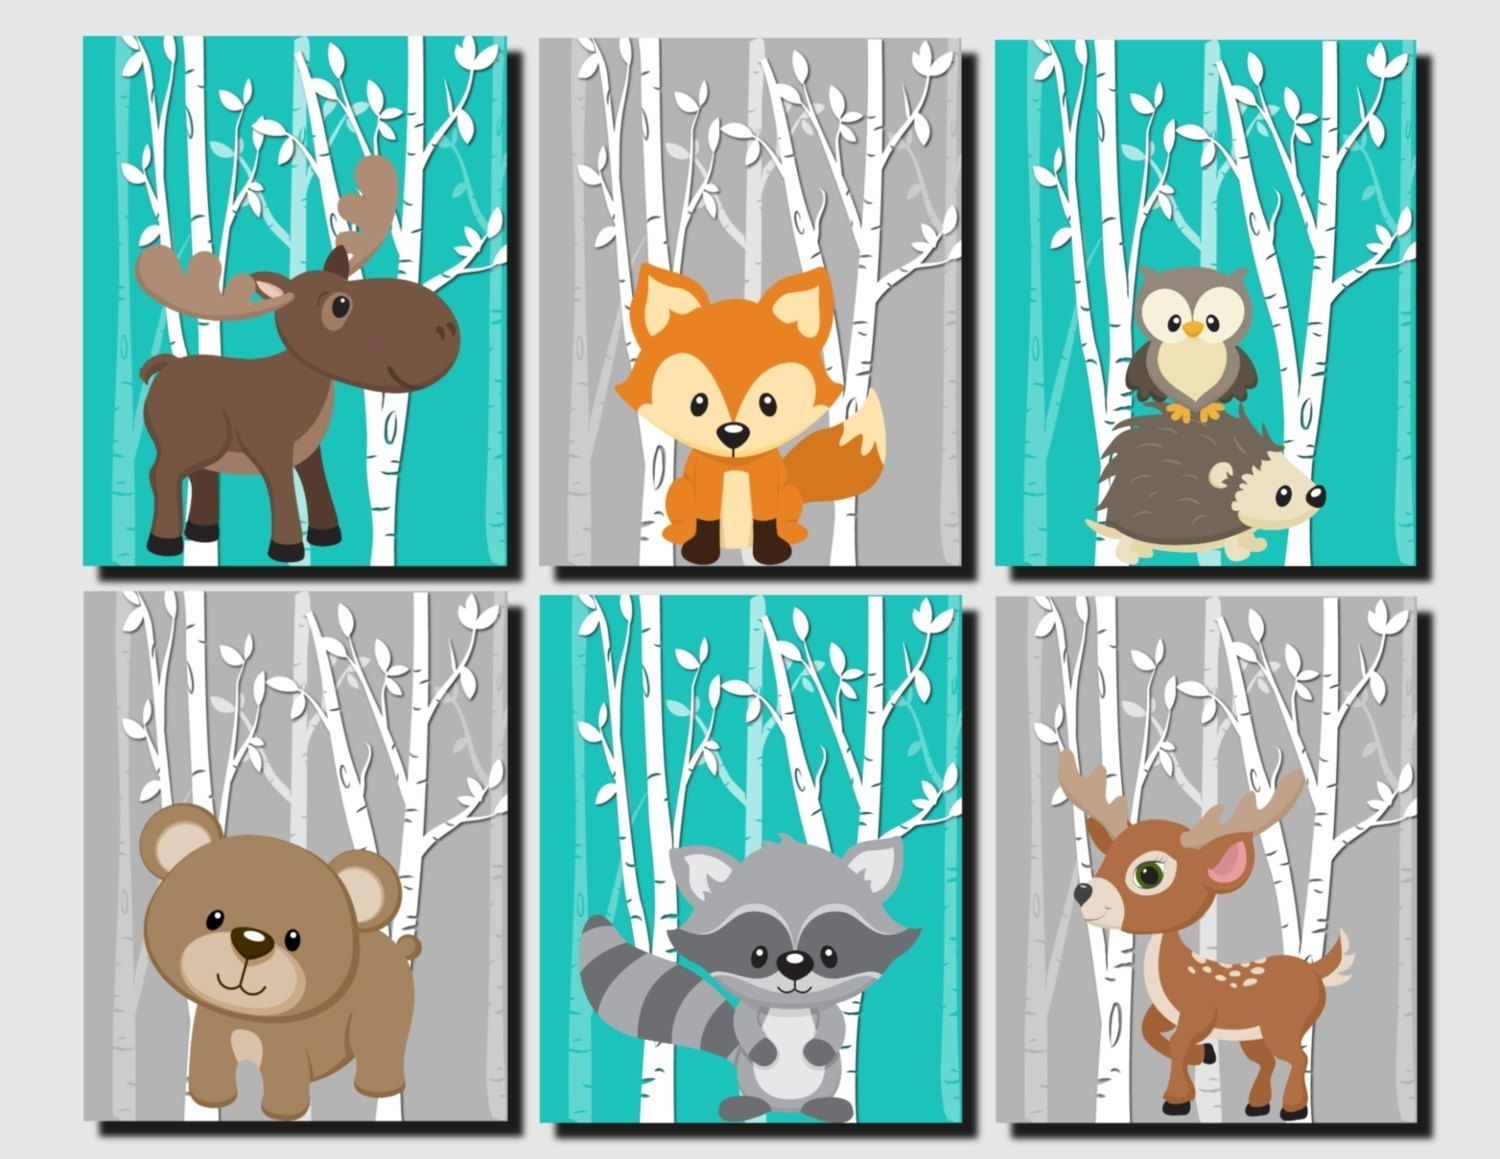 Woodland Nursery, Woodland Wall Decor Kids, Teal, Gray, Forest Throughout Current Woodland Nursery Wall Art (View 1 of 20)